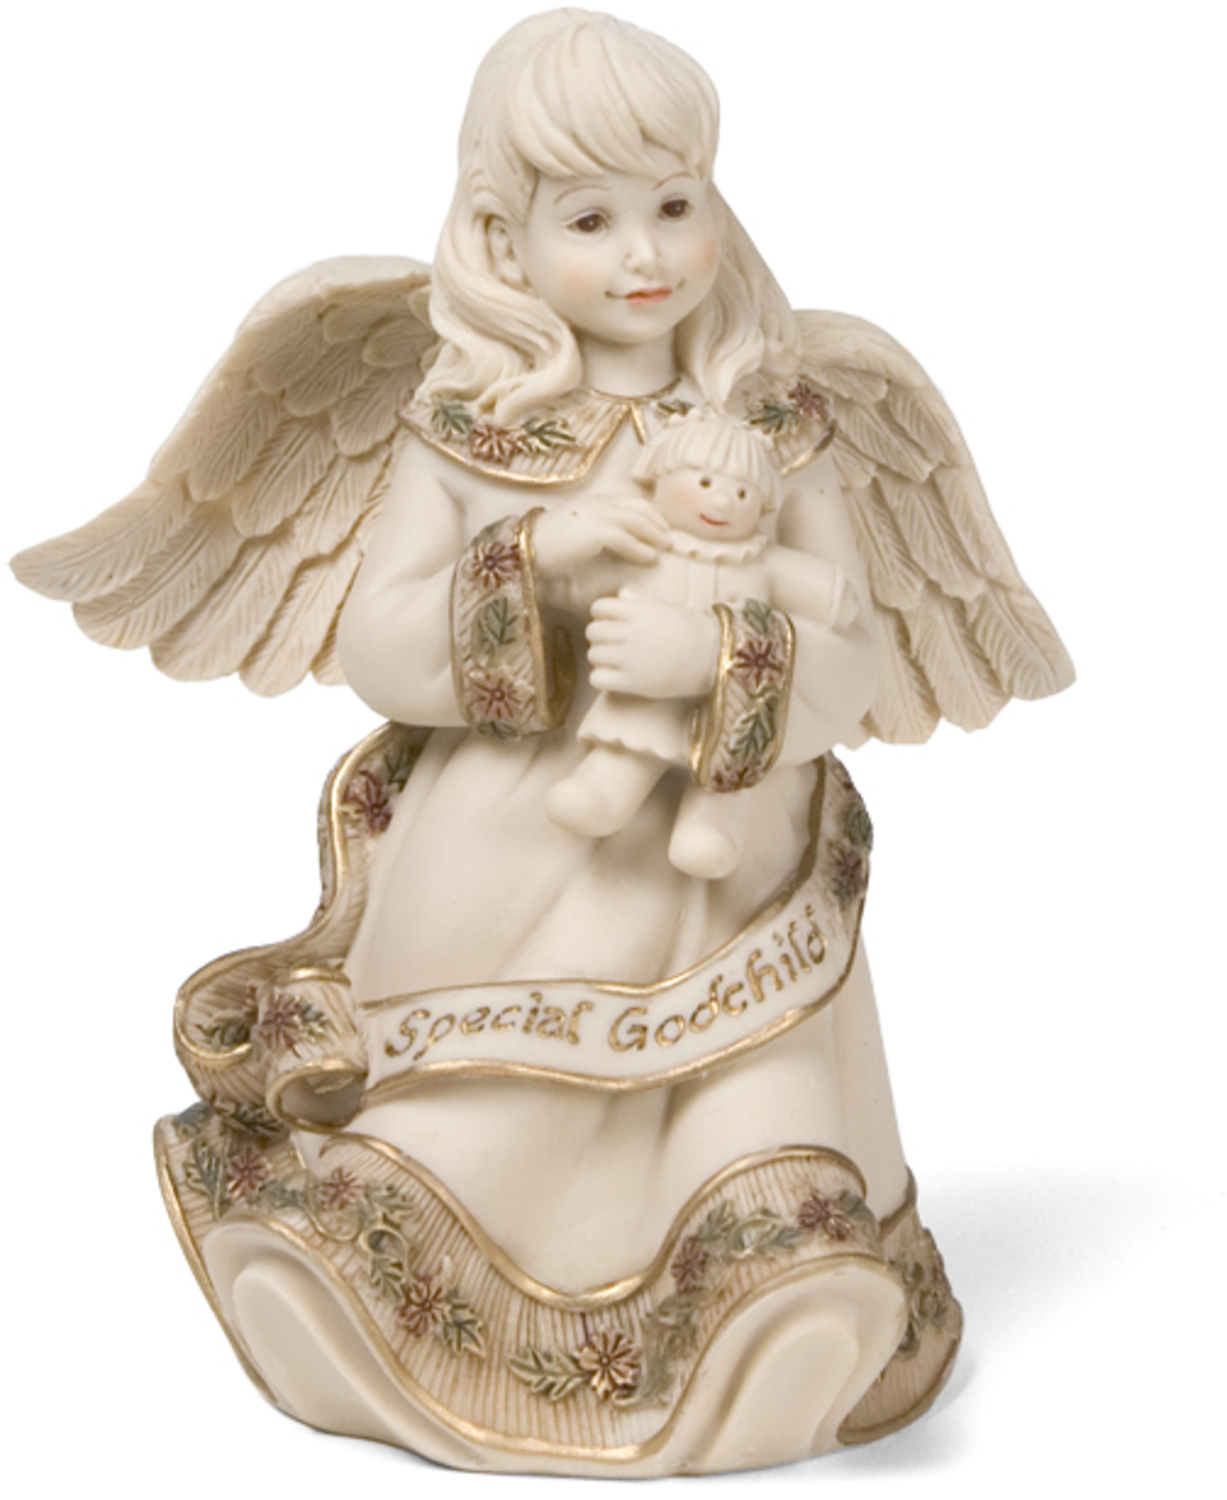 Special Godchild Angel by Sarah's Angels - Special Godchild Angel - 4.5" Angel with Doll